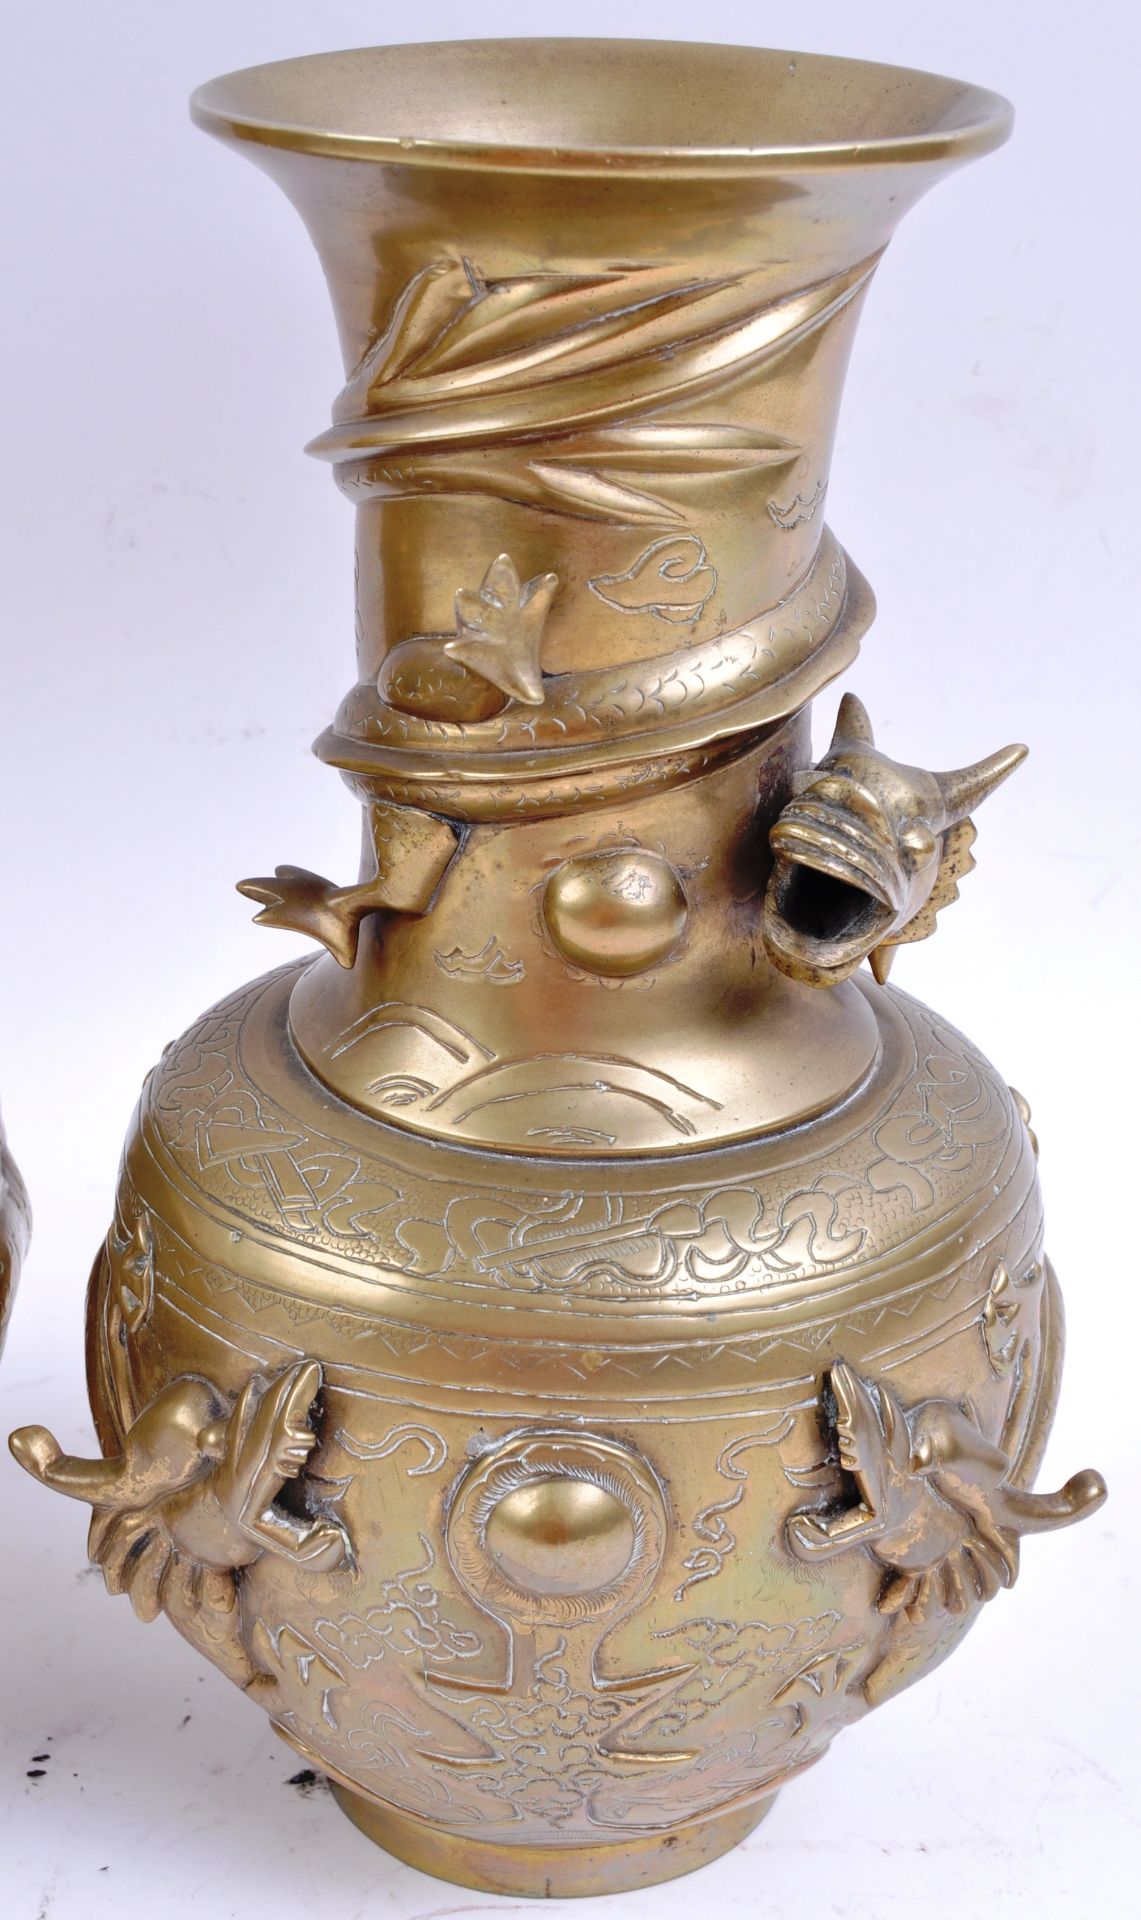 PAIR OF ANTIQUE CHINESE BRASS DRAGON VASES - Image 3 of 8